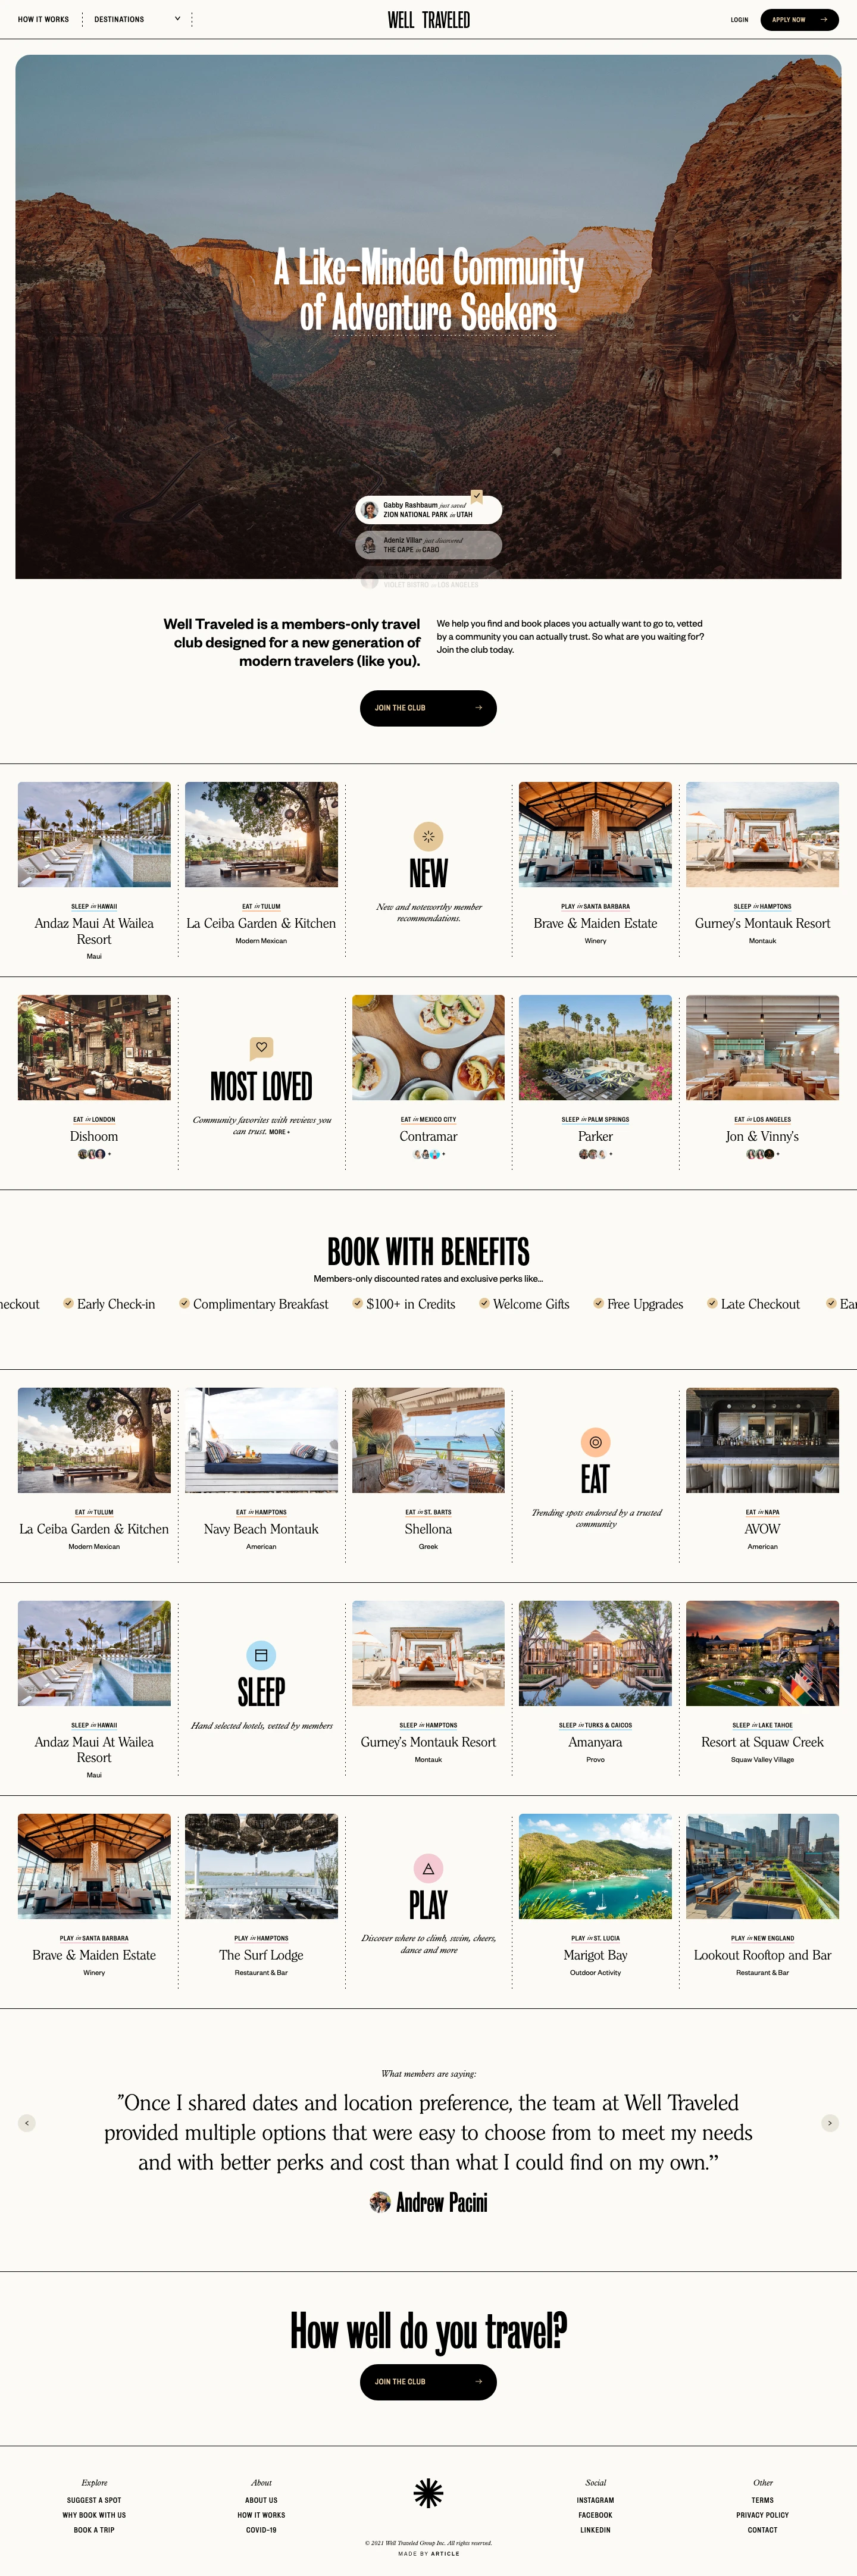 Well Traveled Landing Page Example: A members-only platform for travelers, foodies and adventure seekers.